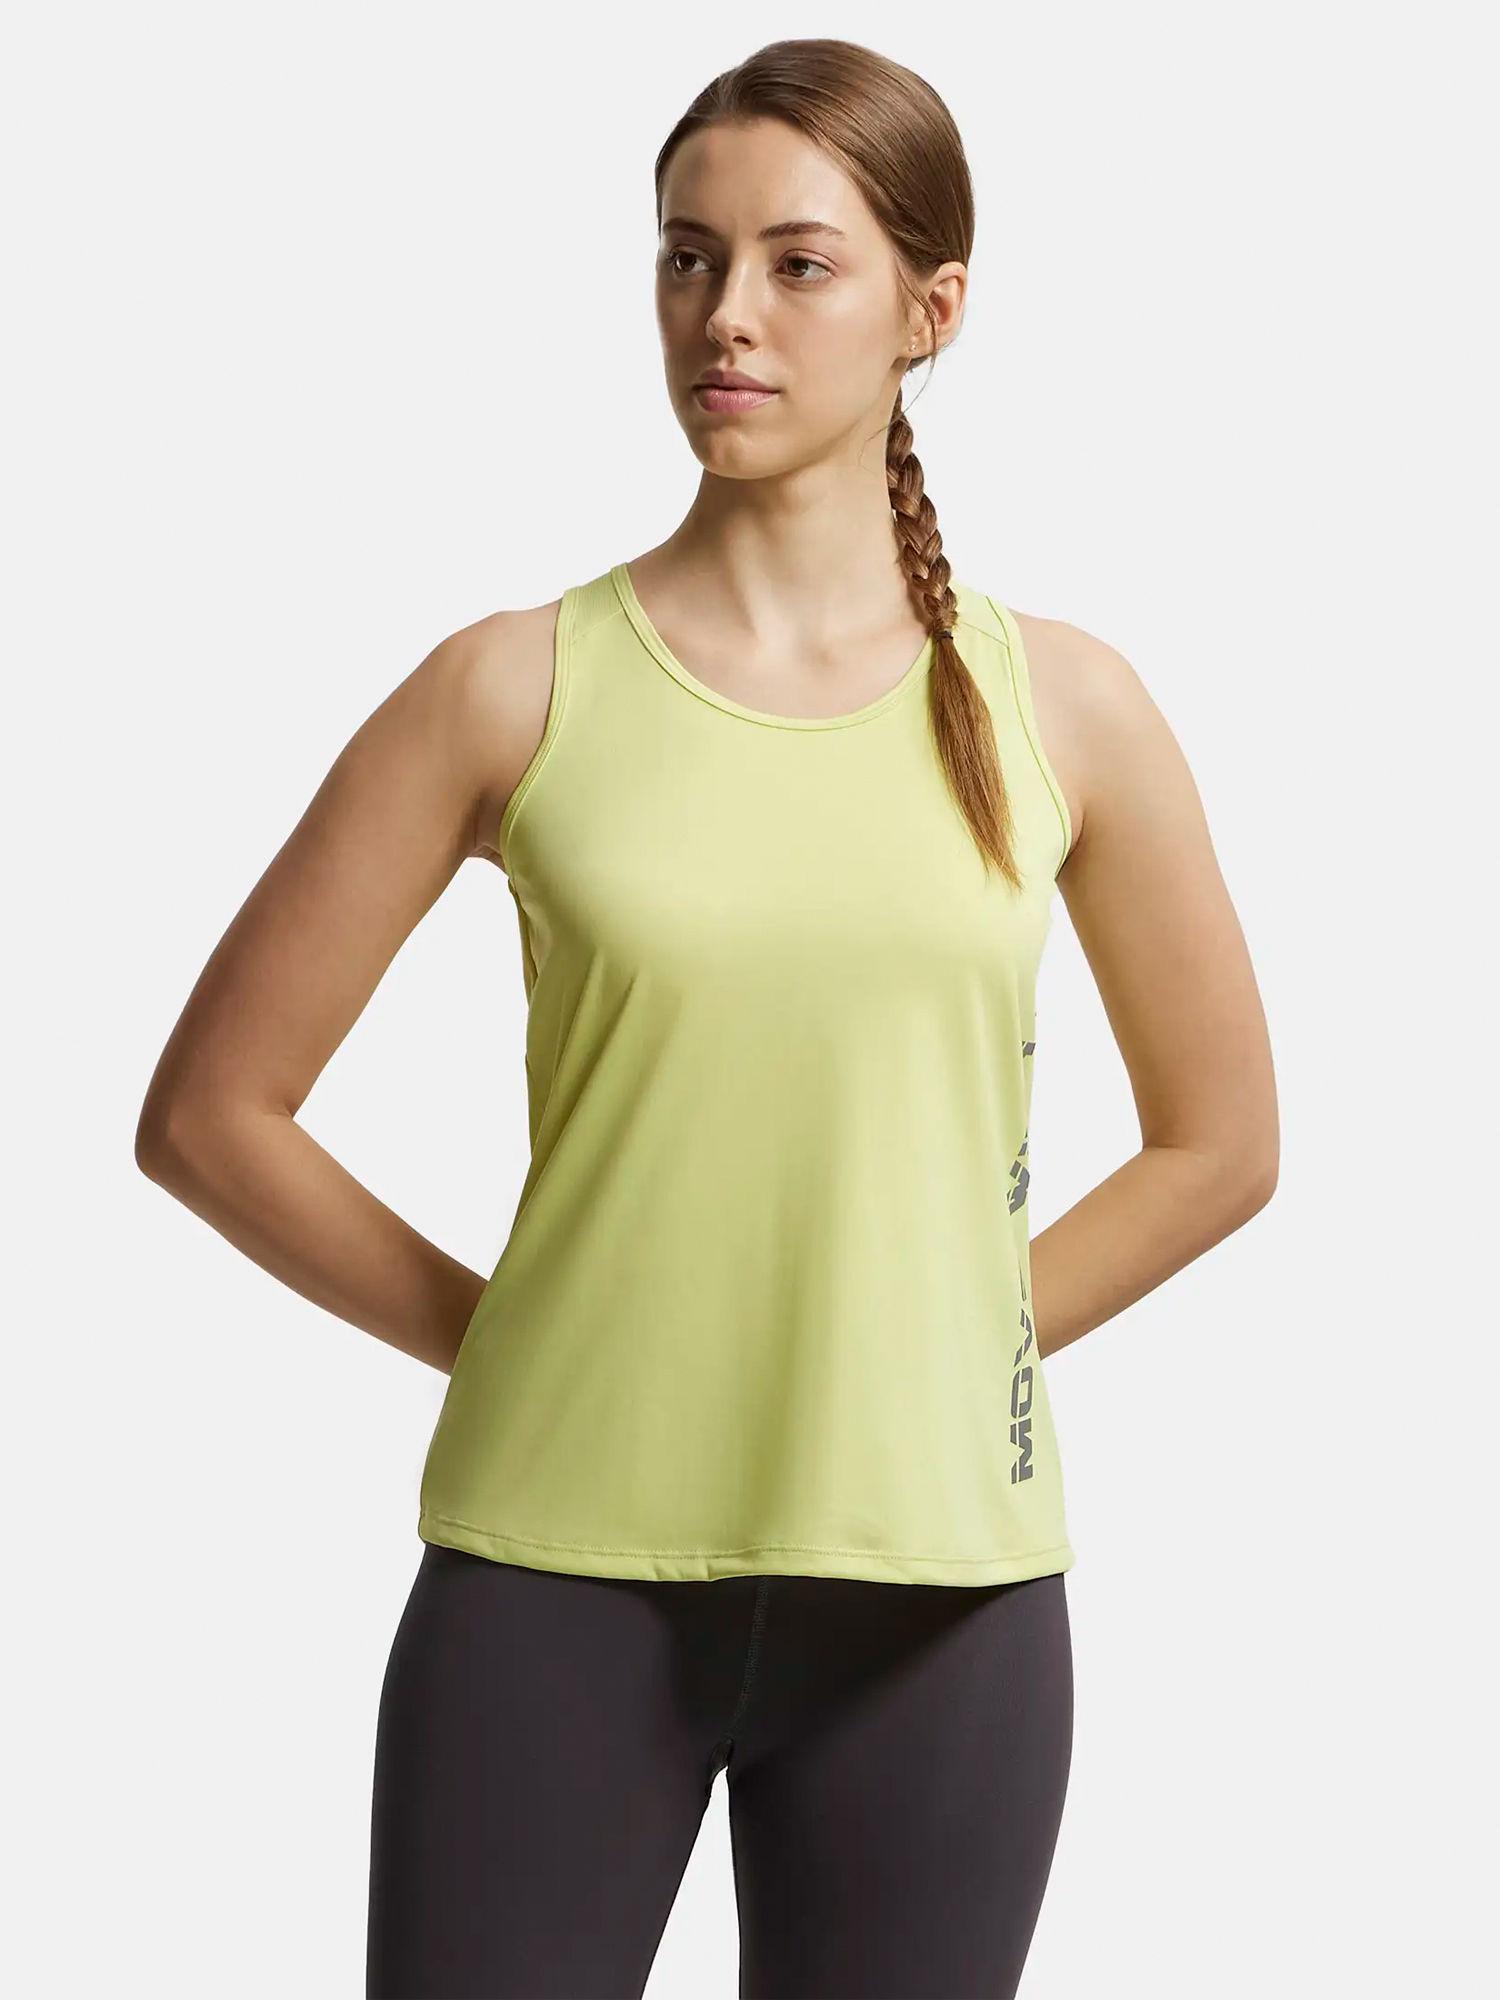 mw33 women's microfiber performance tank top with stay dry treatment green